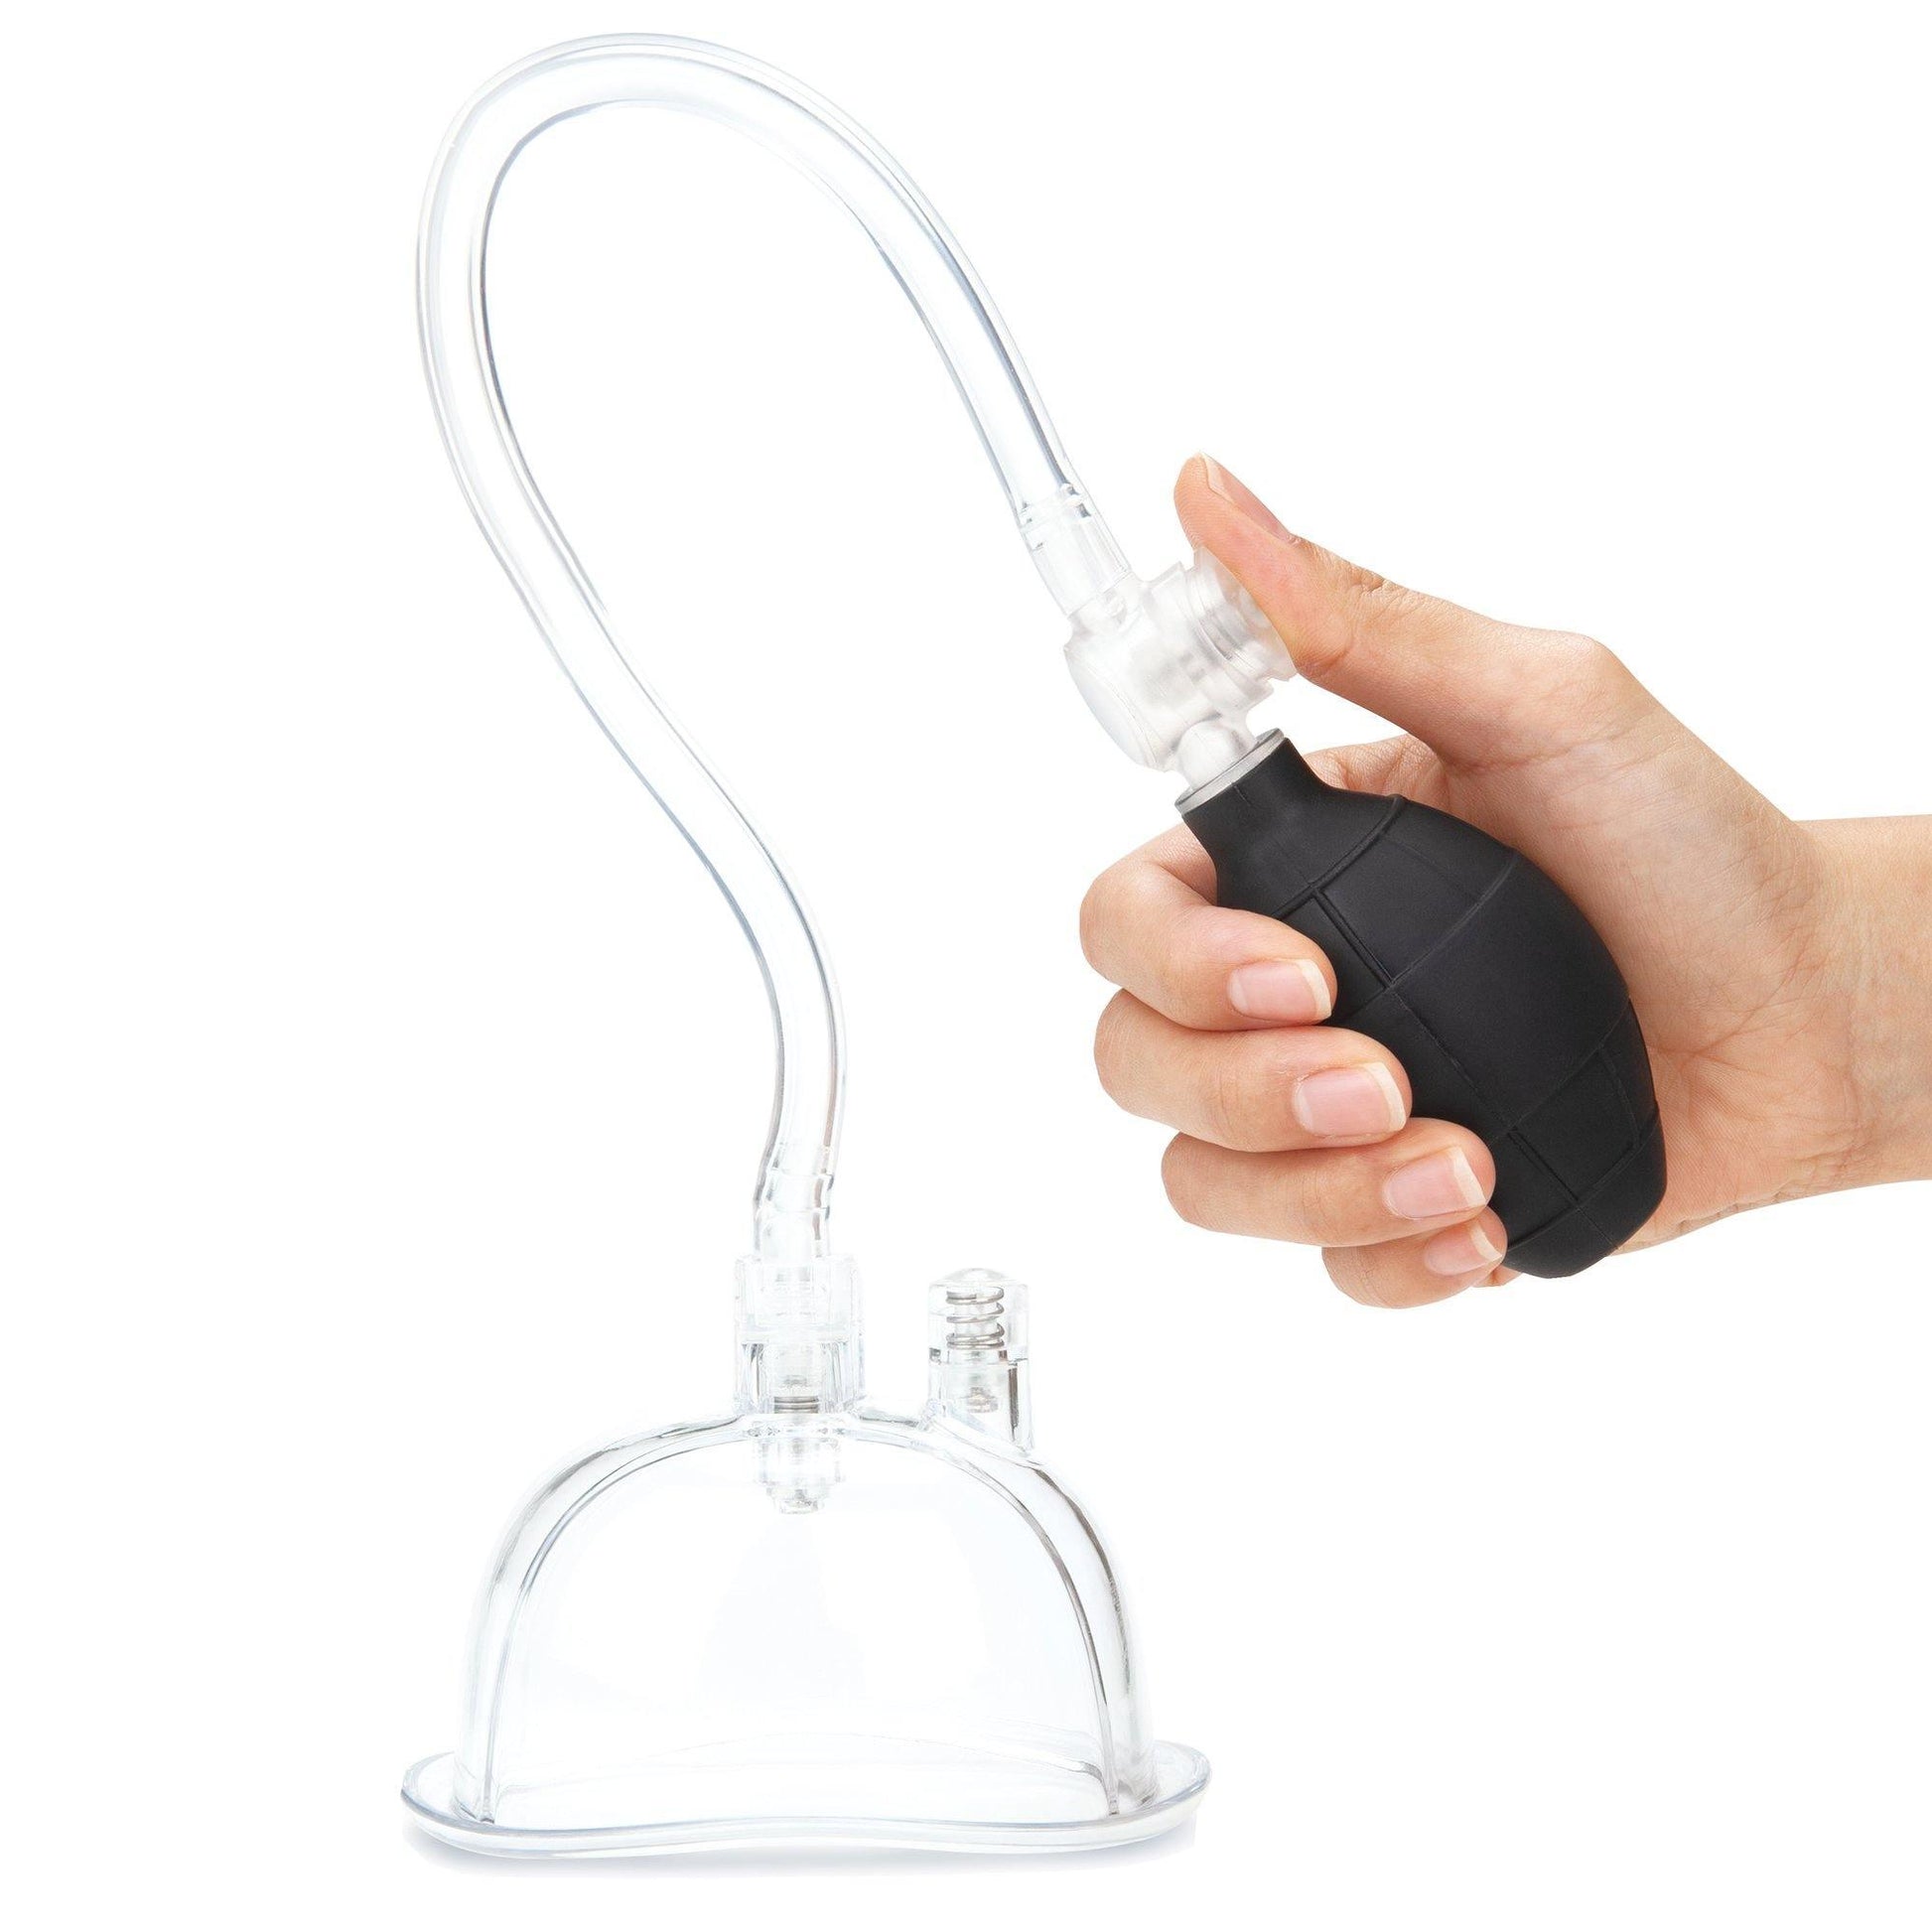 Pussy Pump Clit Clamp Included - My Sex Toy Hub